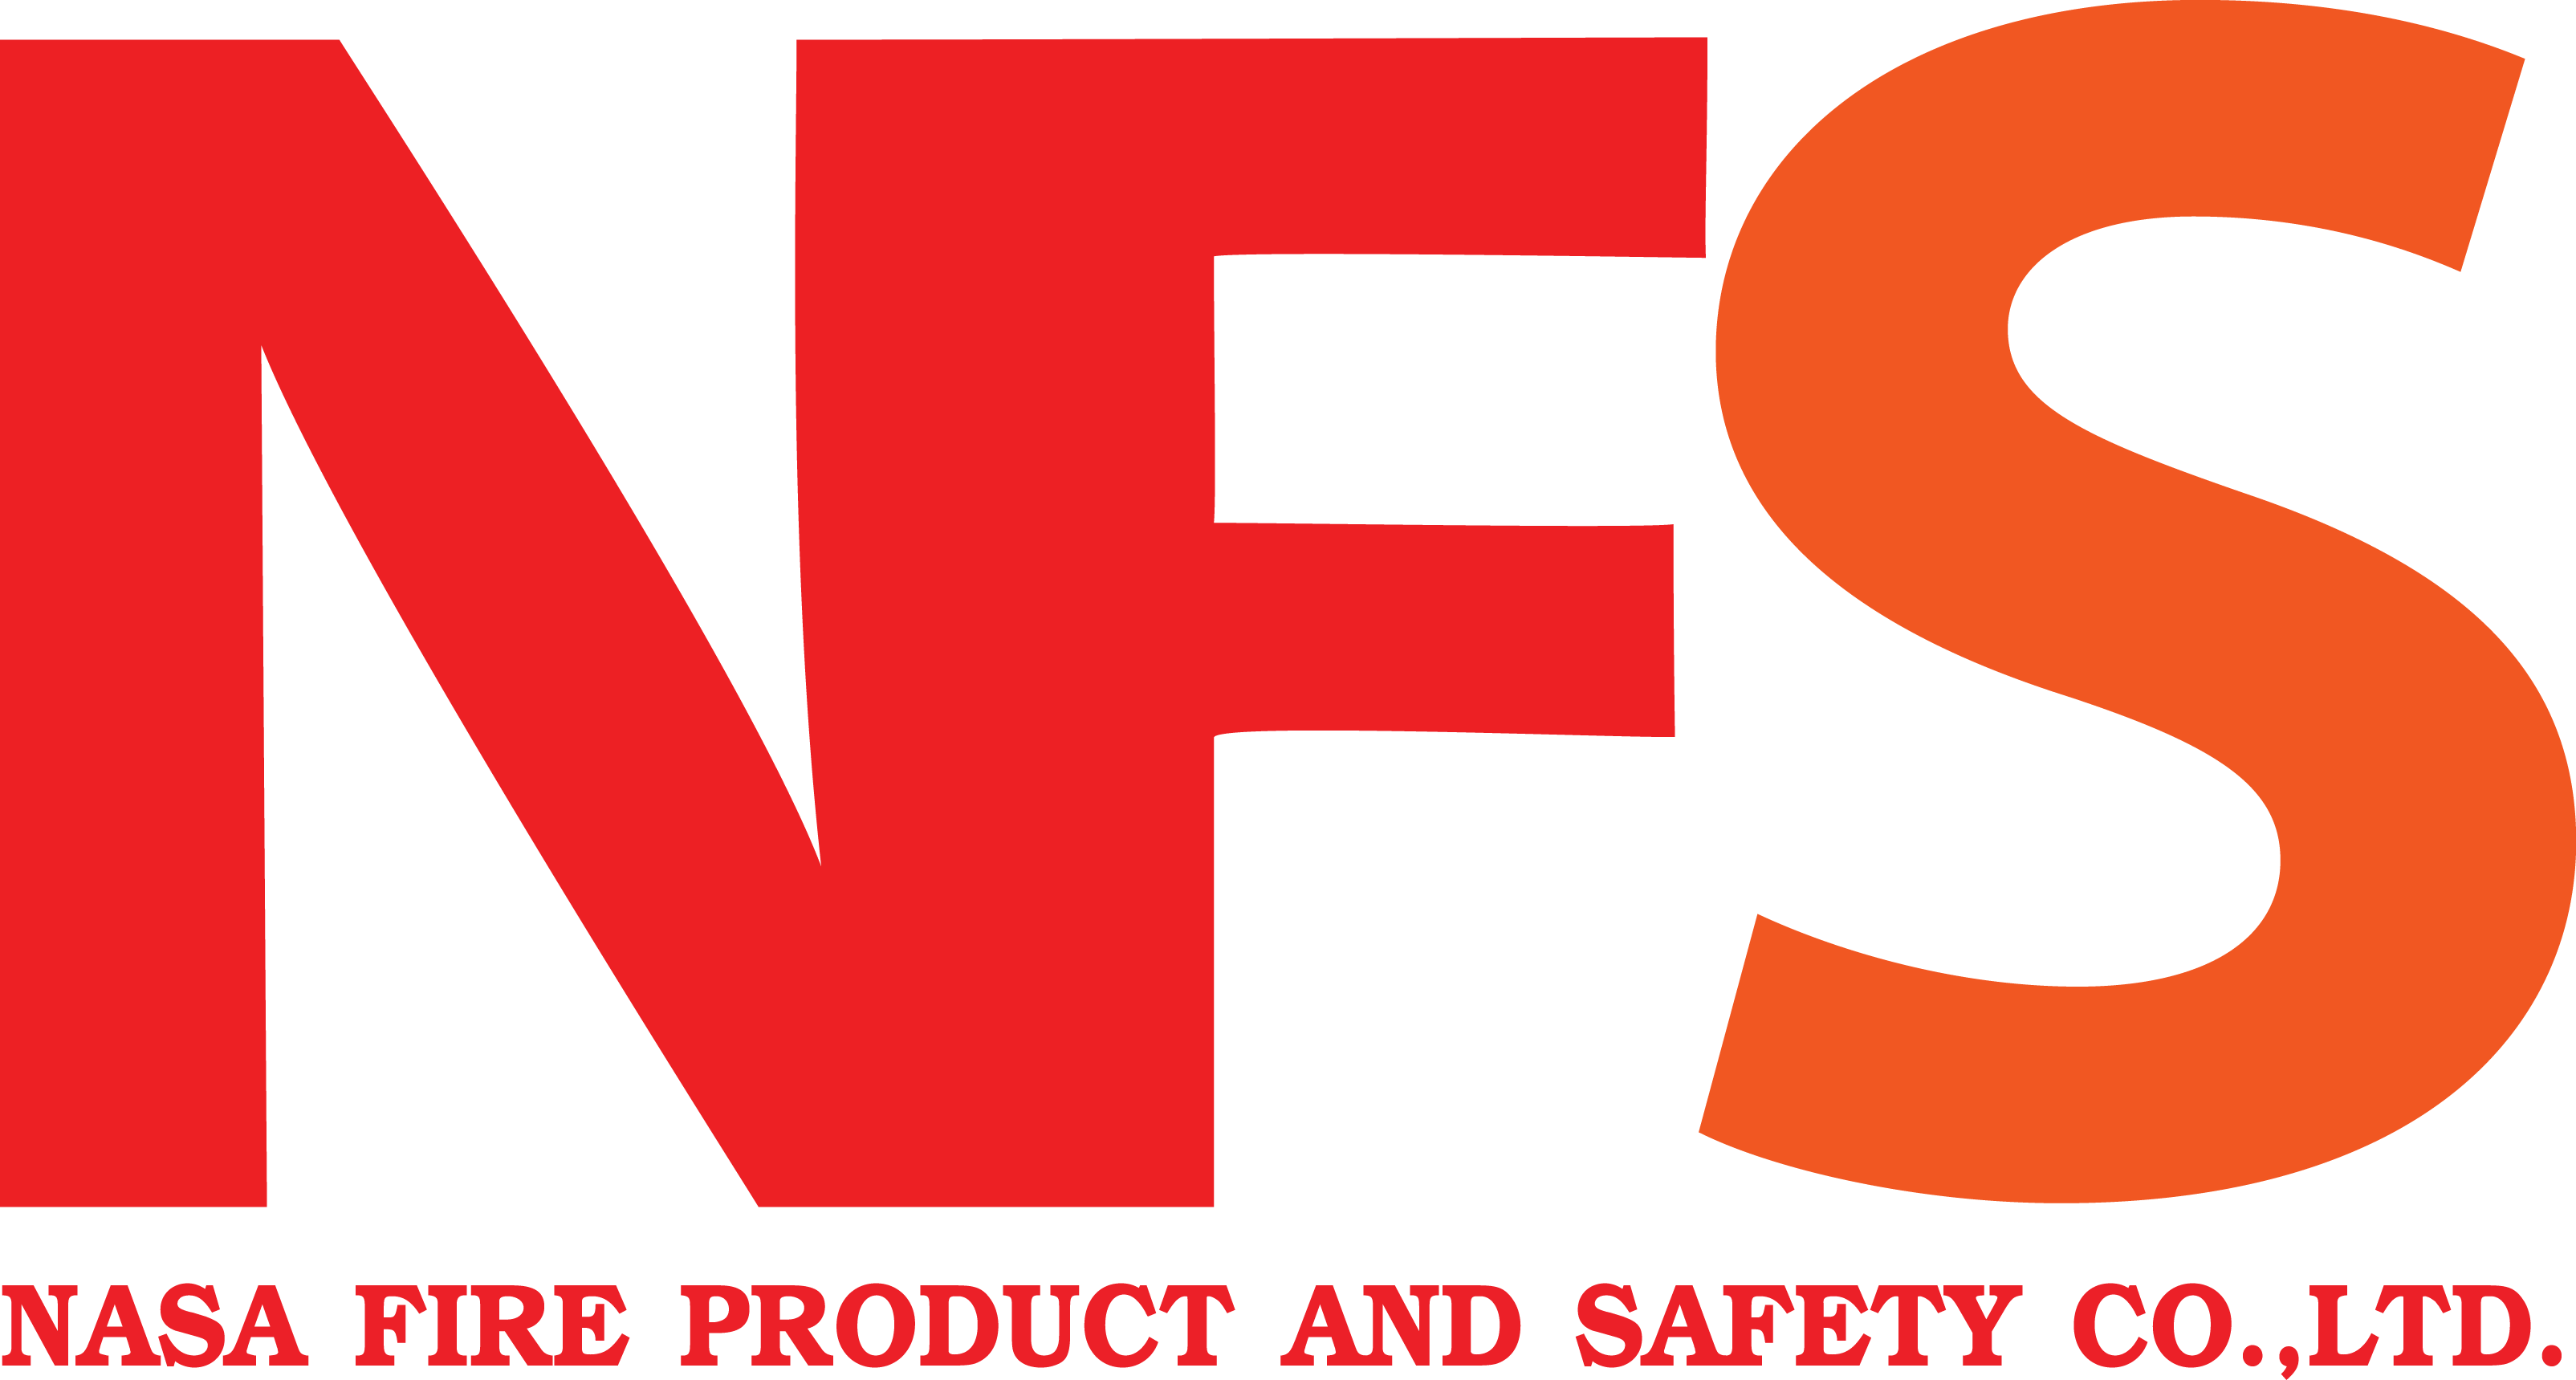 NASA FIRE PRODUCT AND SAFETY